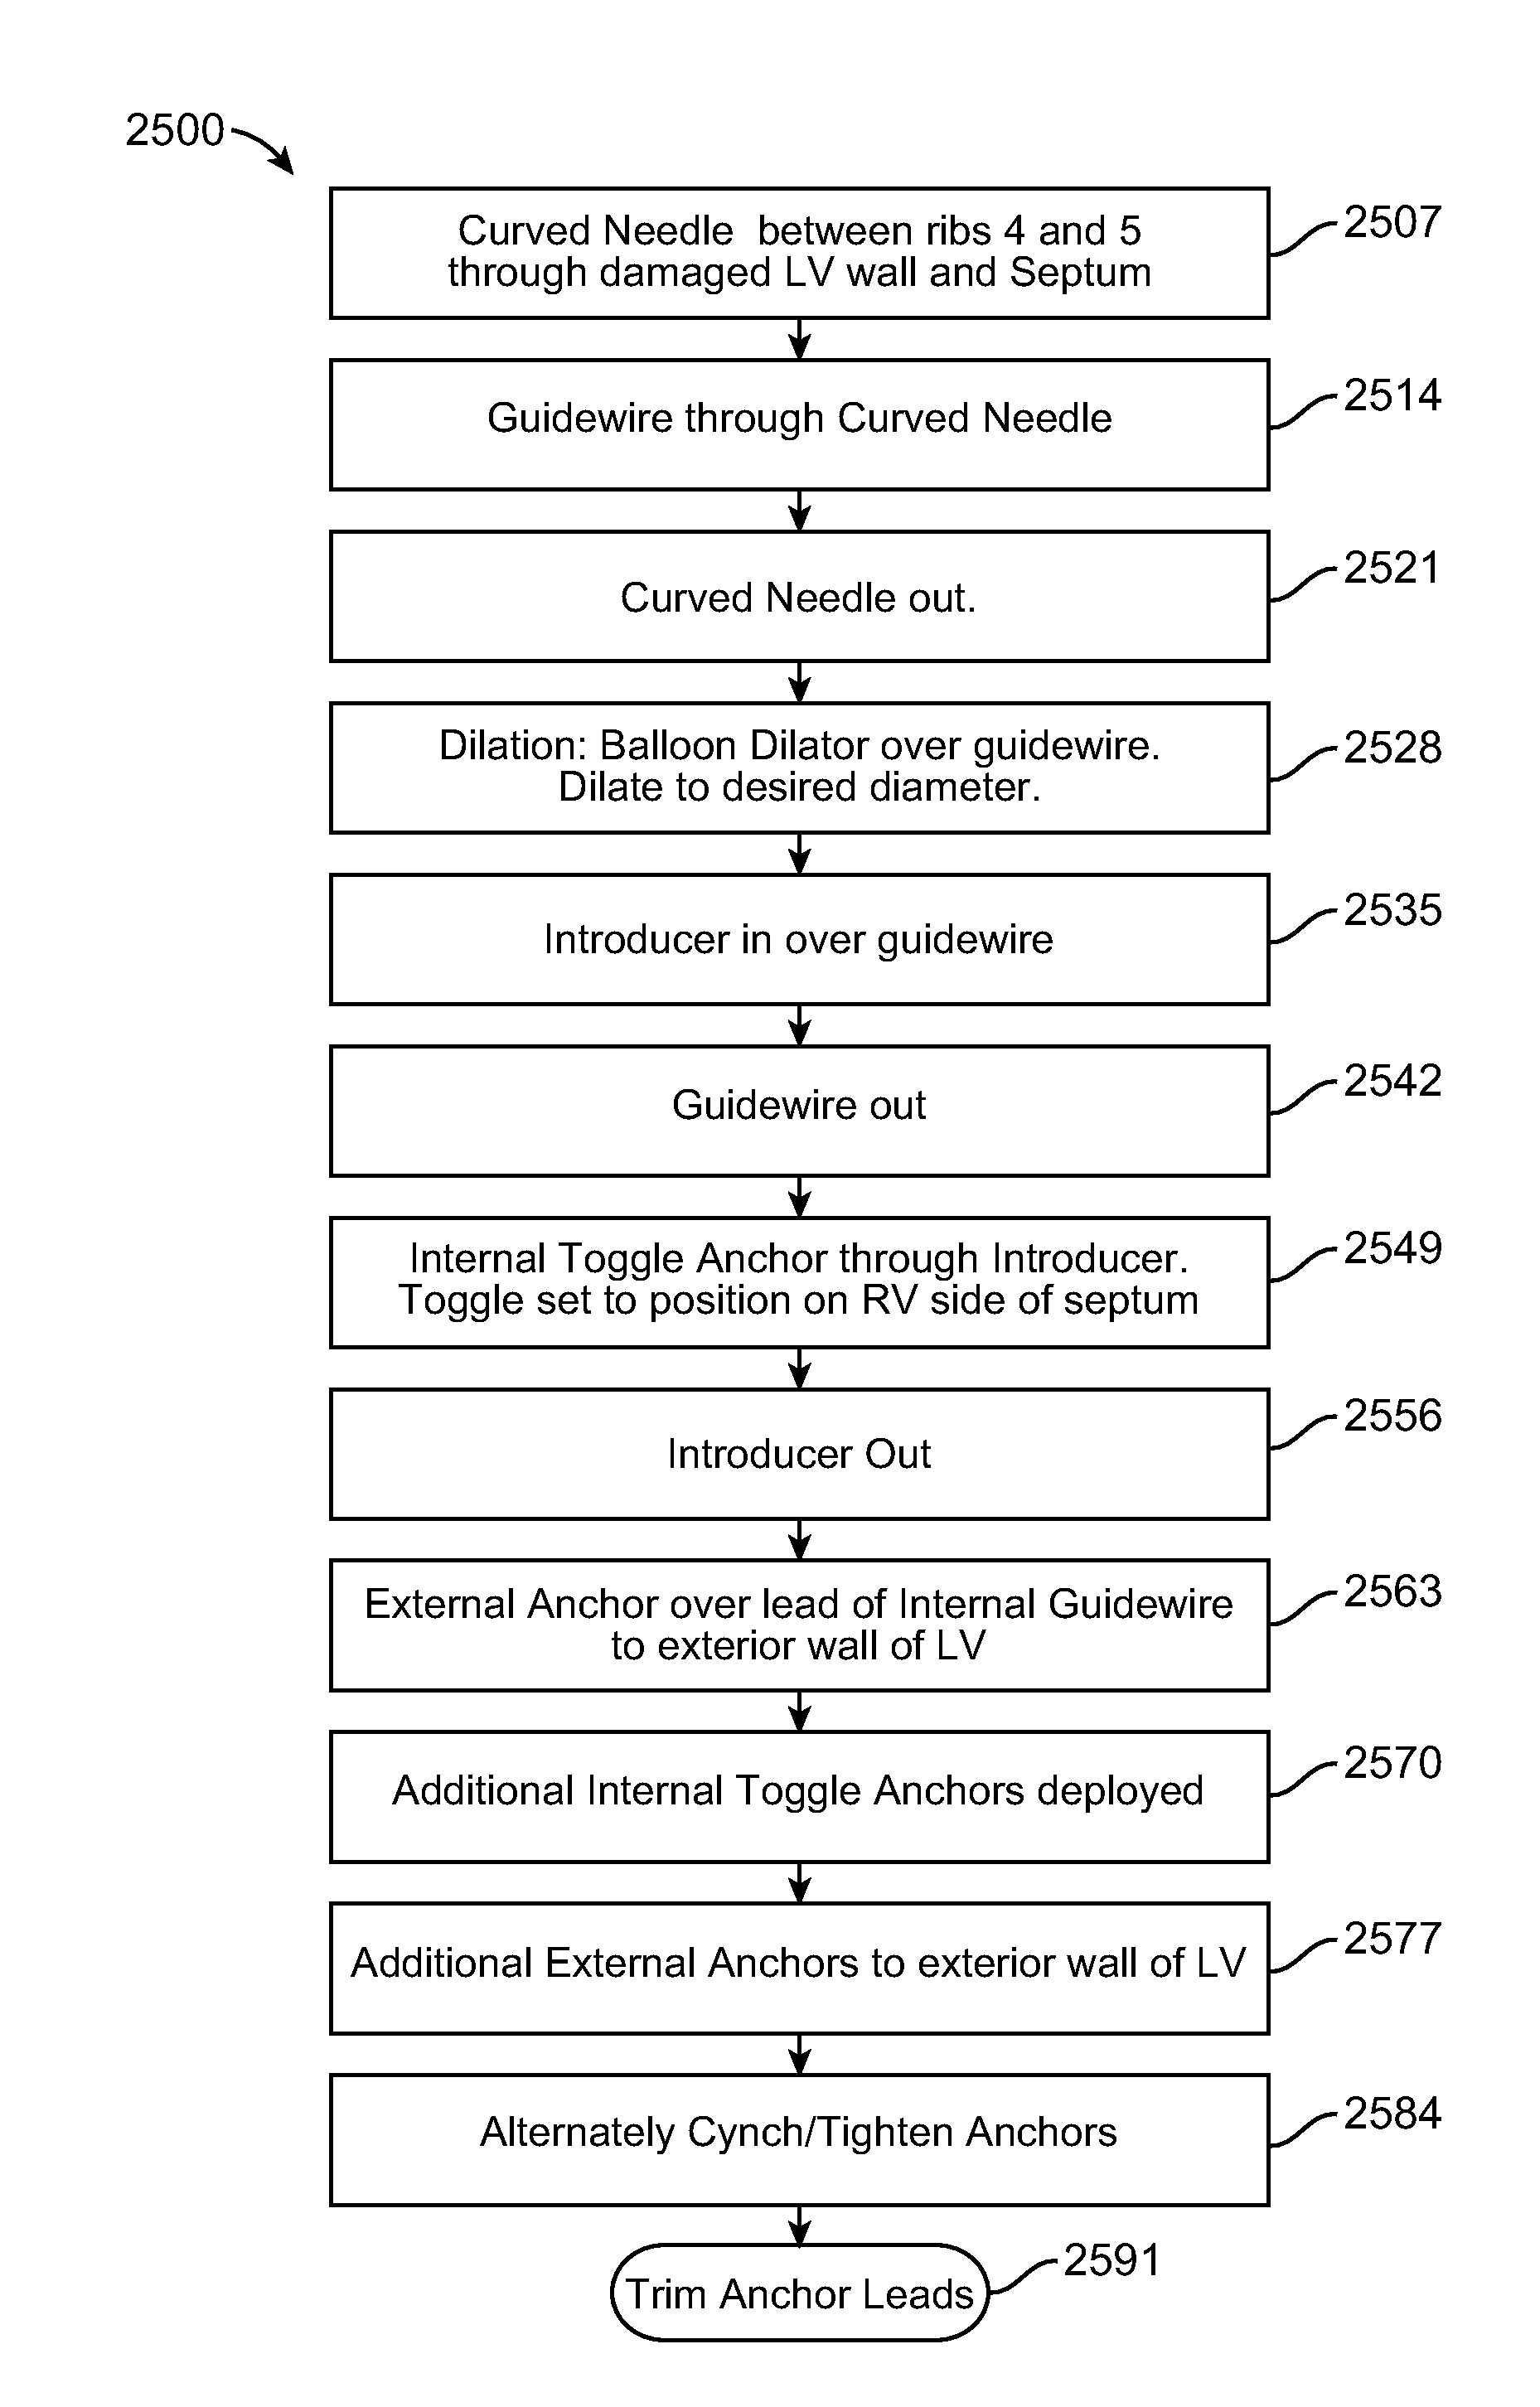 Cardiac Anchor Structures, Methods, and Systems for Treatment of Congestive Heart Failure and Other Conditions